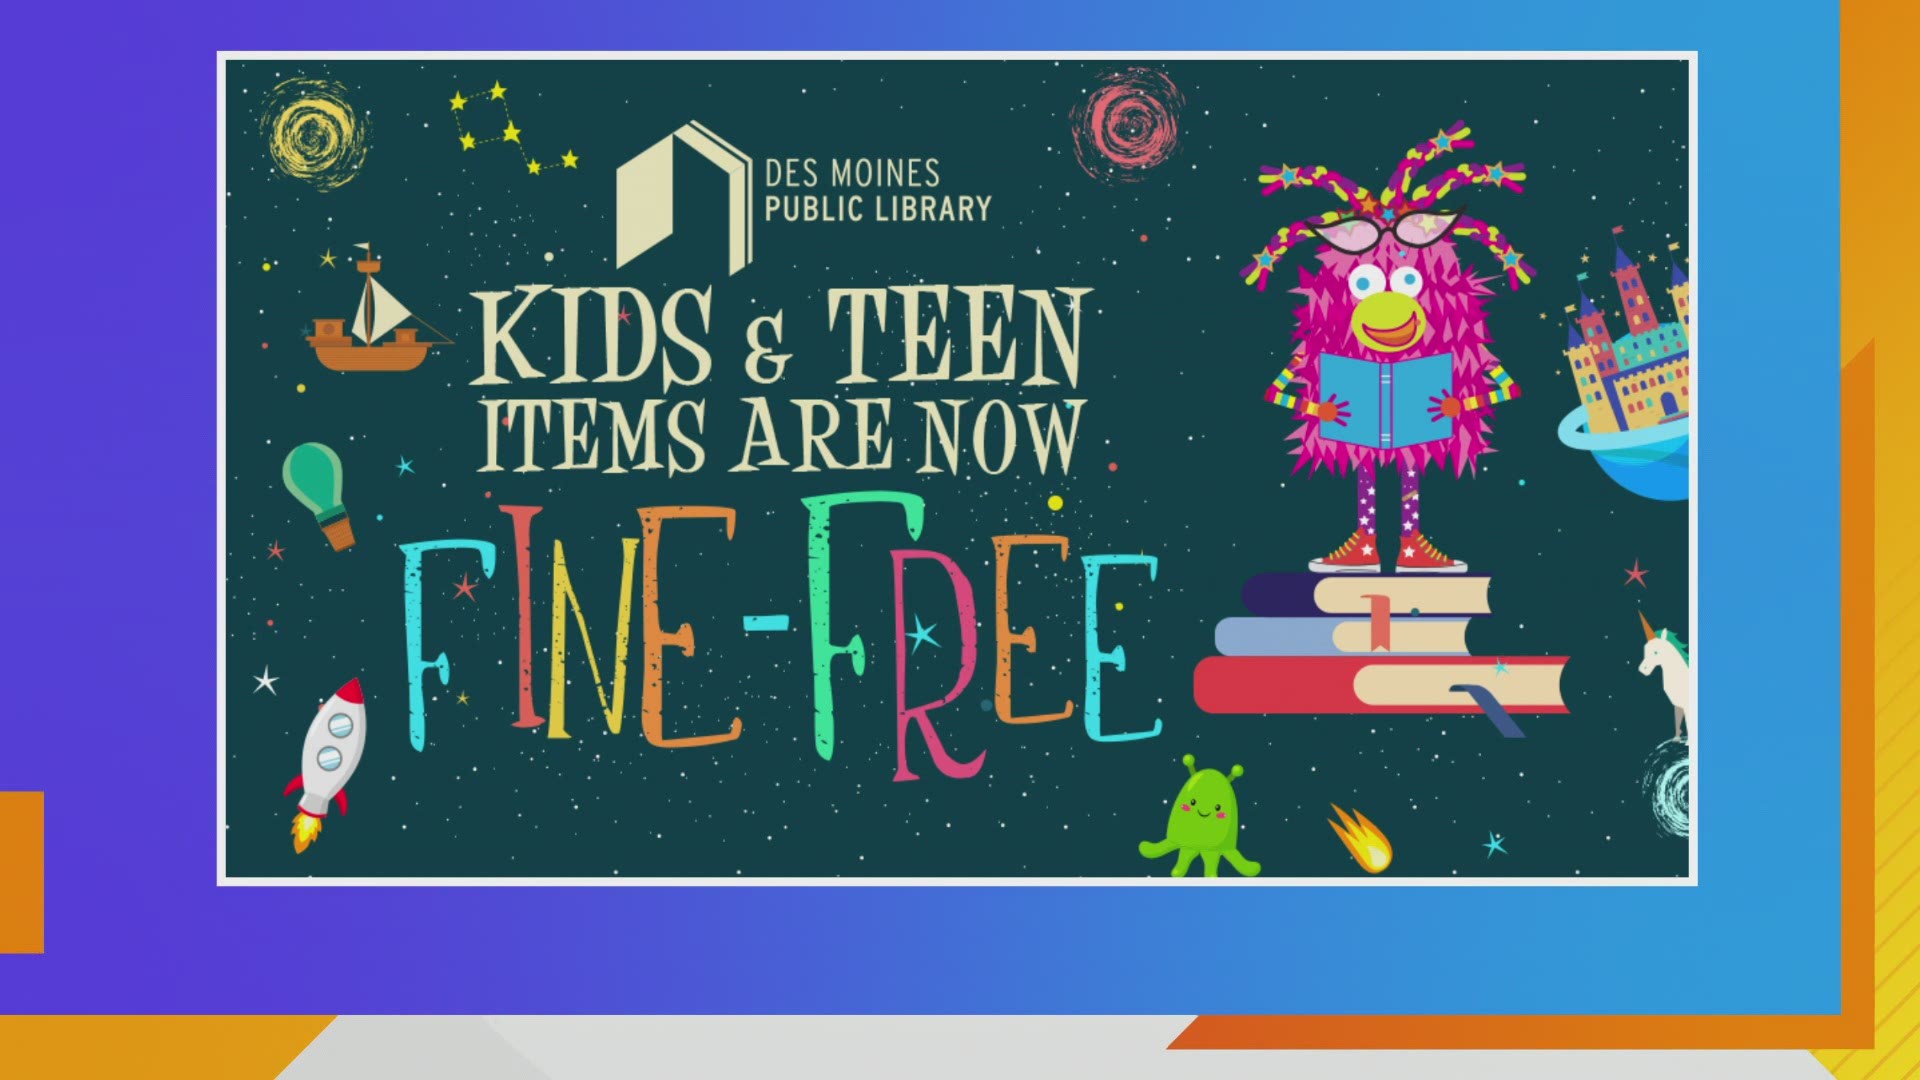 Kids & Teen Items are Fine Free at the Des Moines Public Library